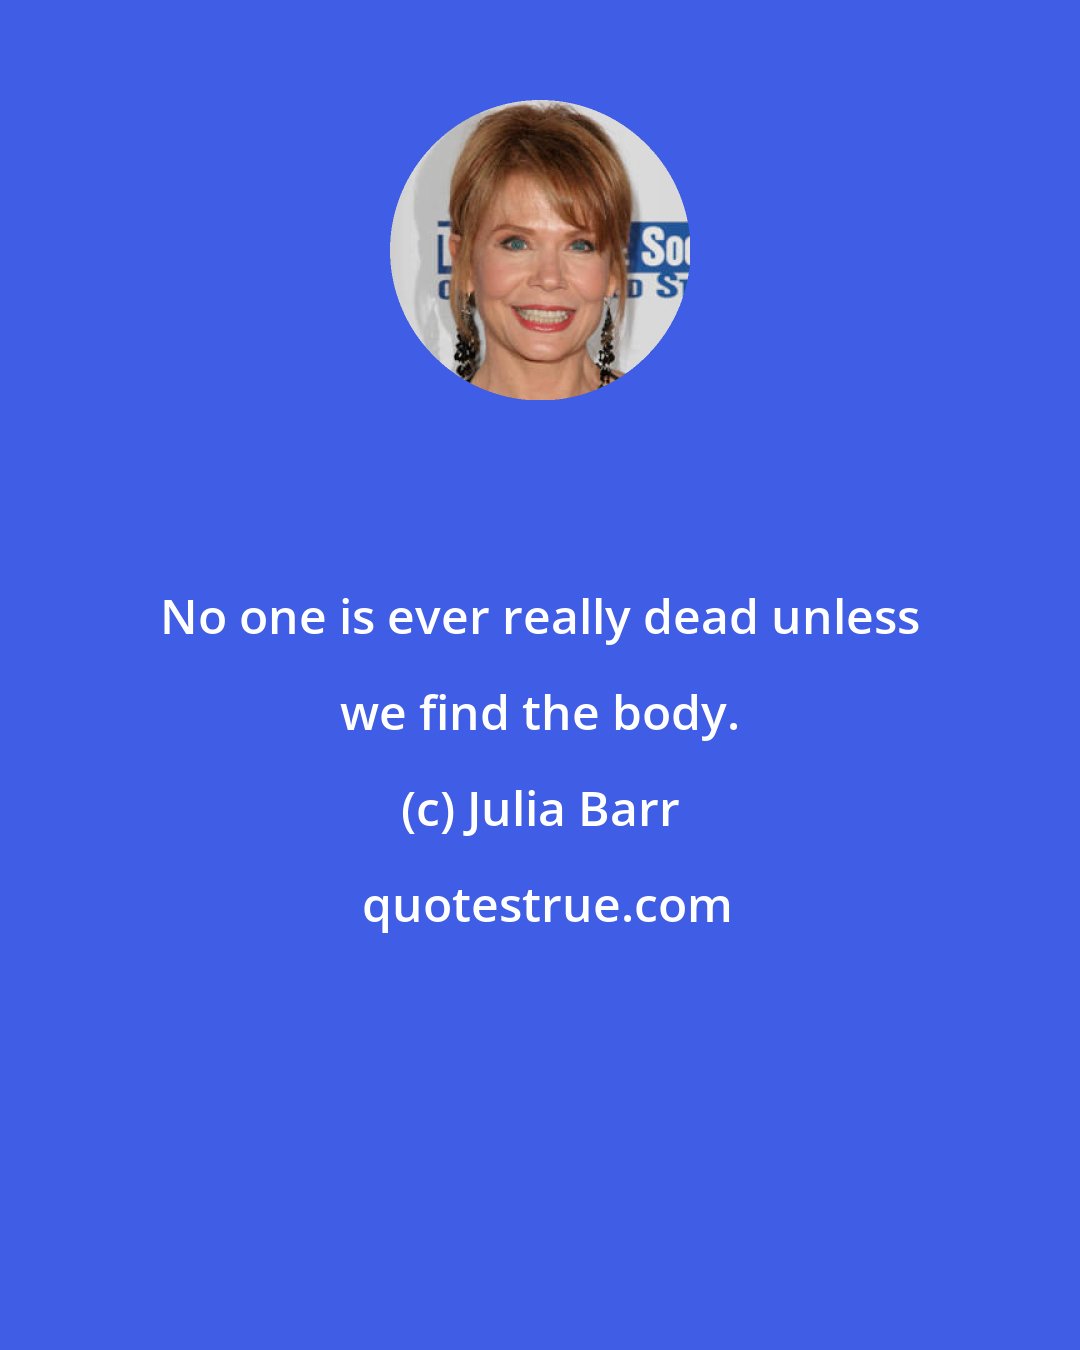 Julia Barr: No one is ever really dead unless we find the body.